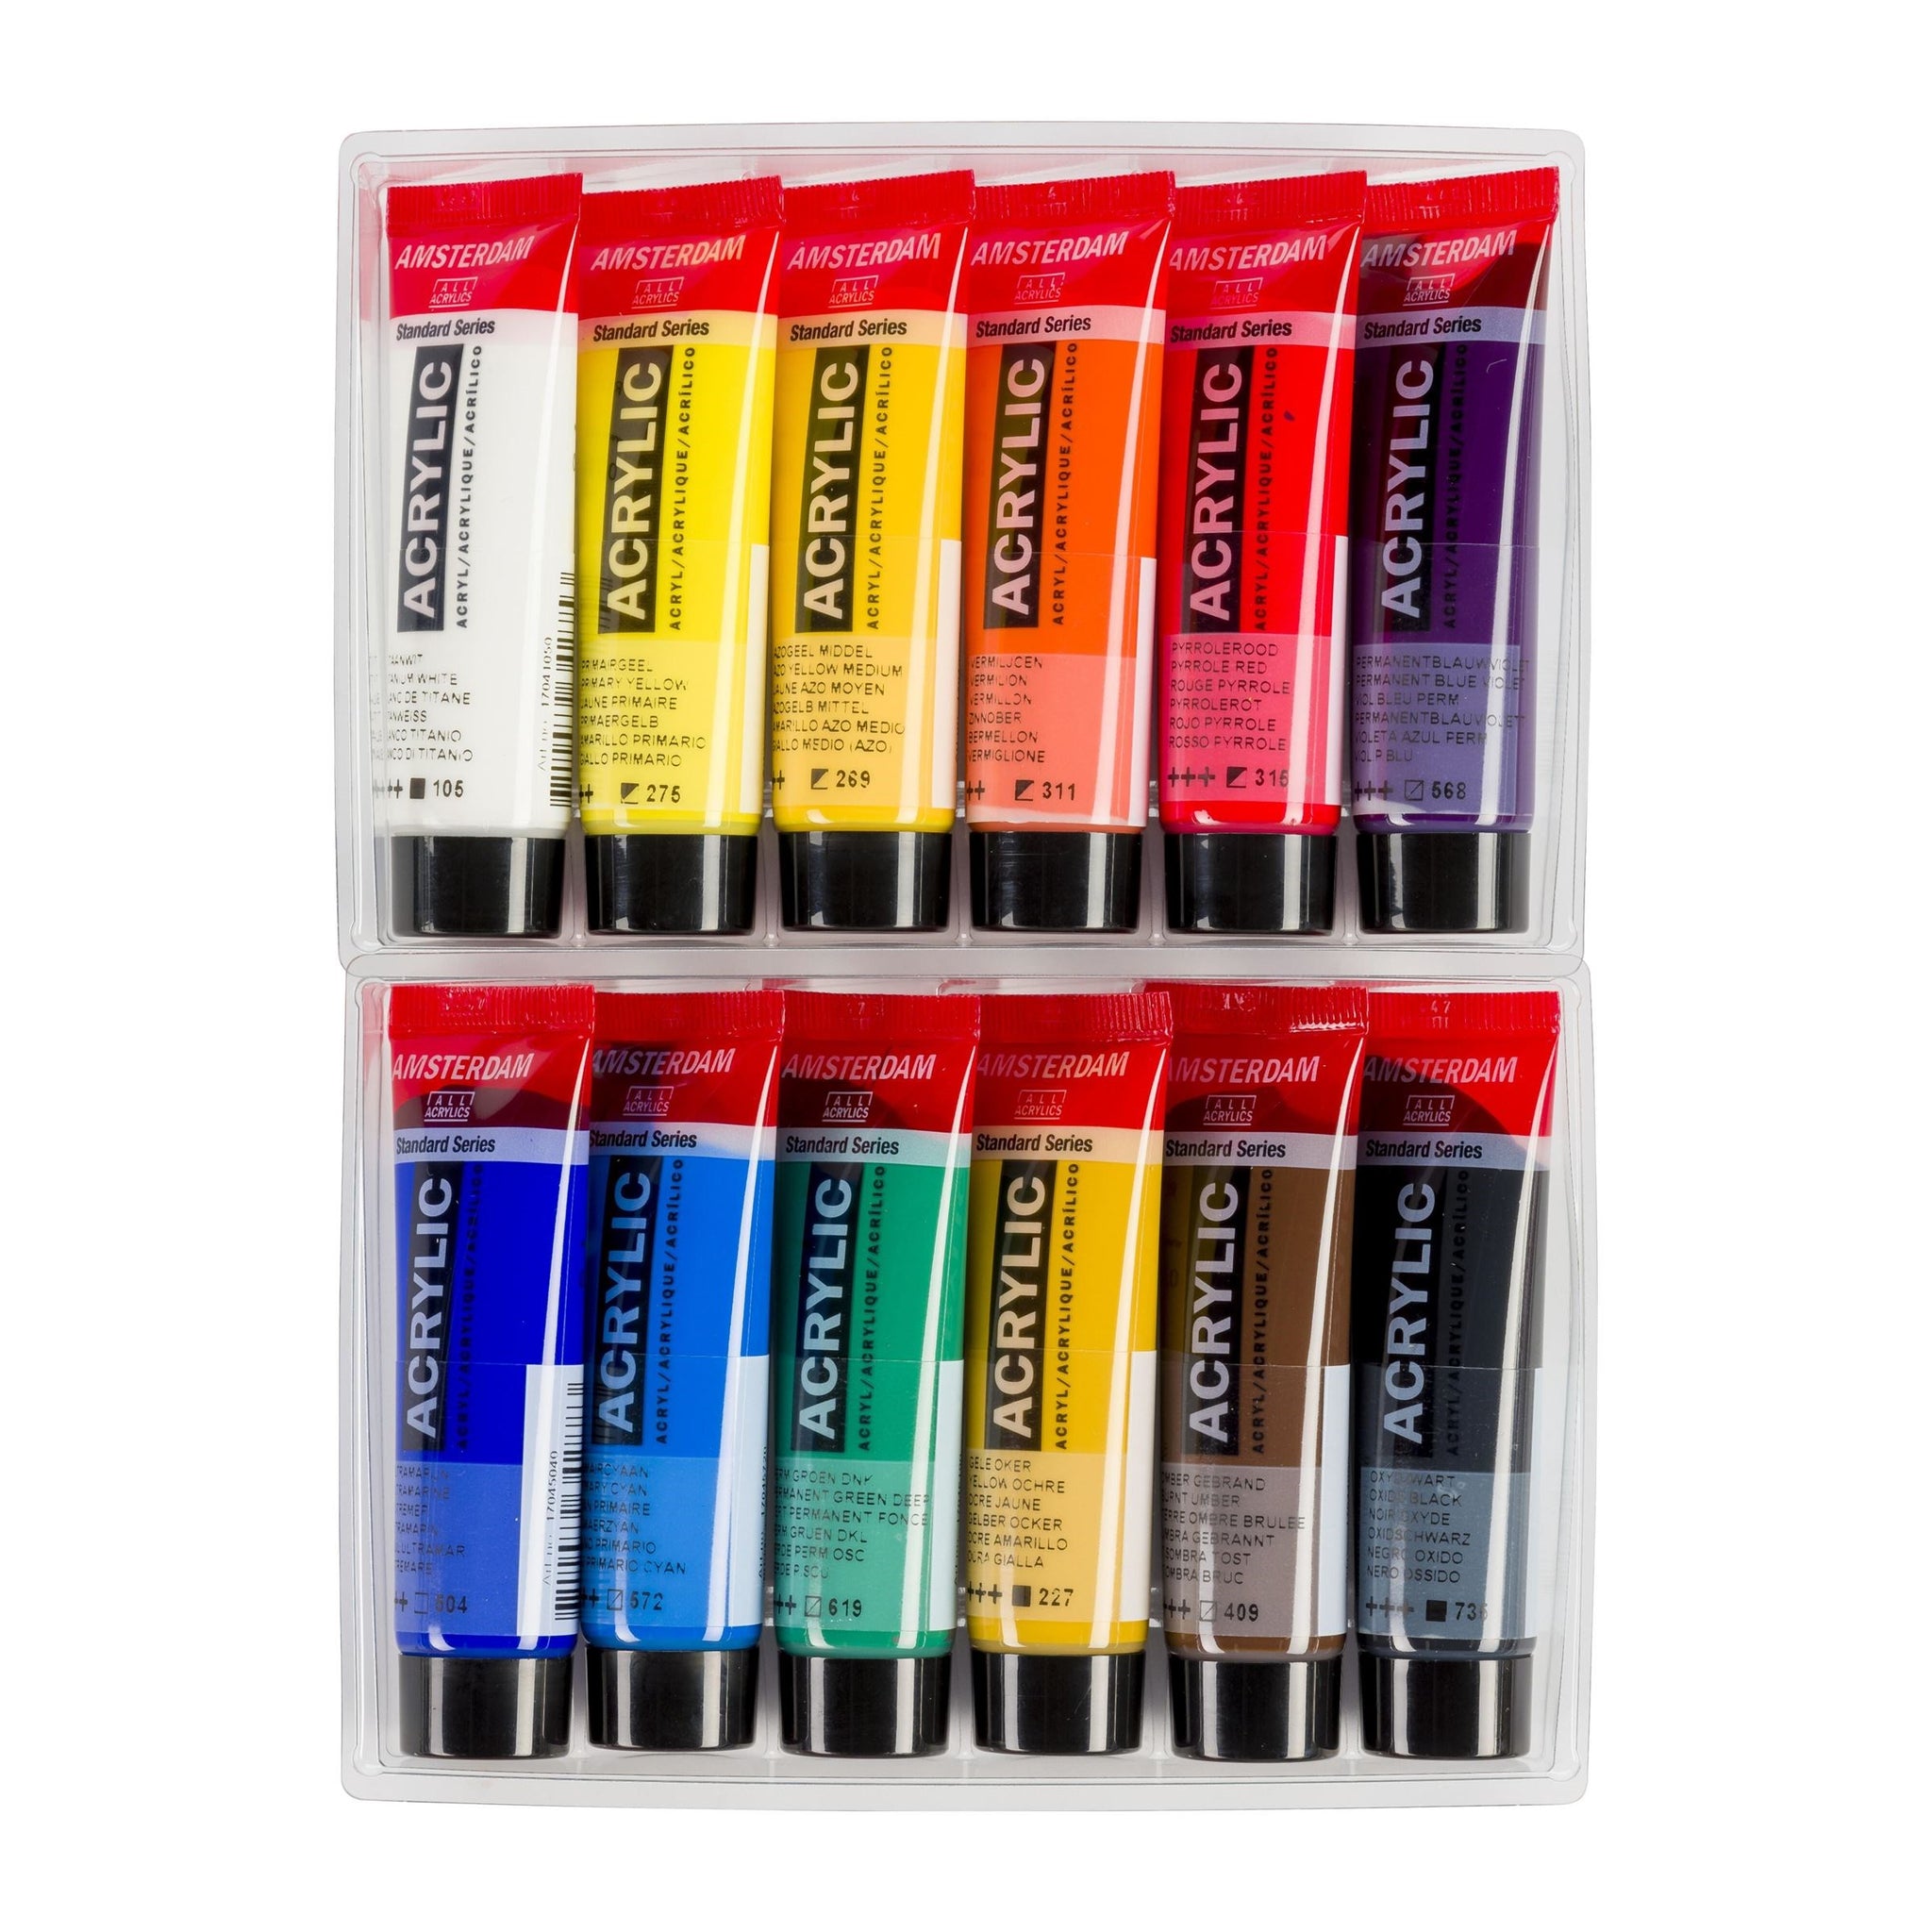 Amsterdam Acrylic Paint Set of 12 Colors, 20ml Tubes – ARCH Art Supplies